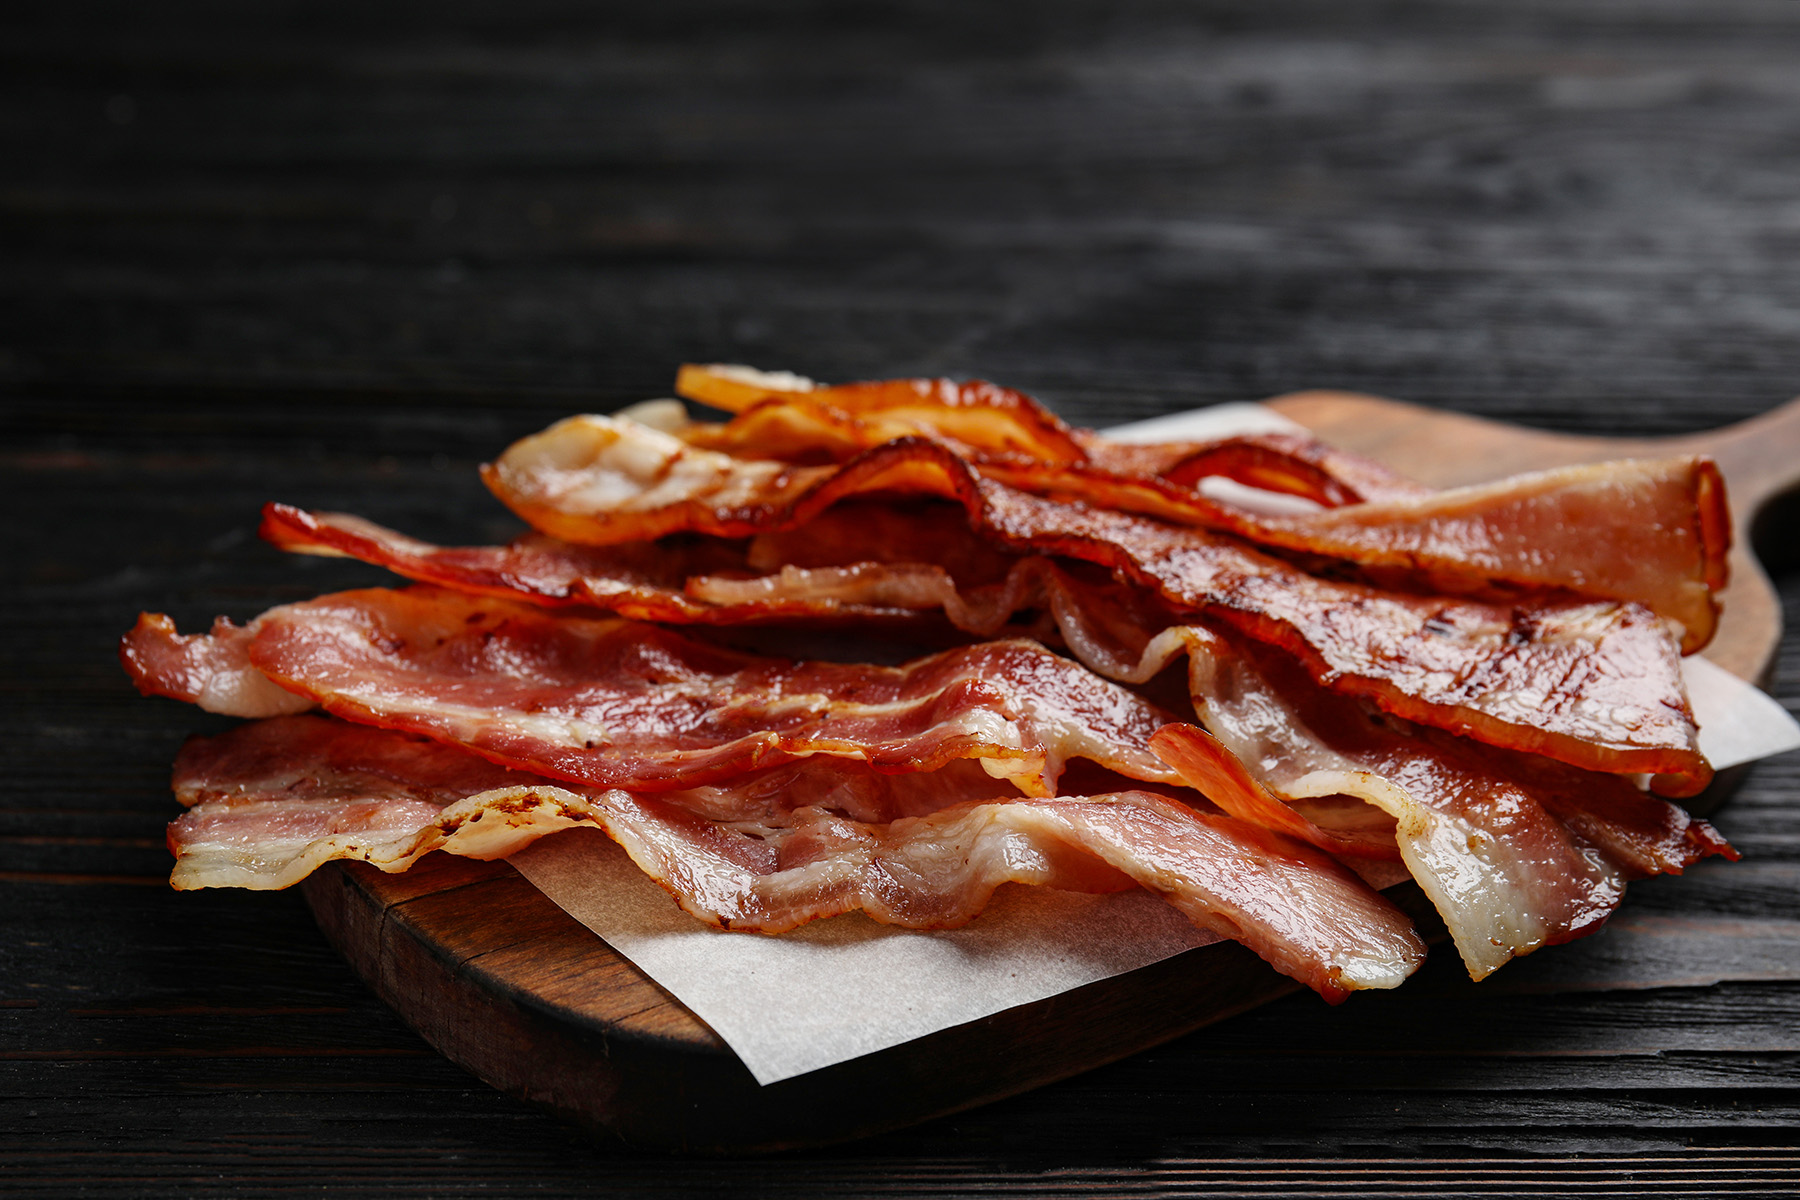 Bacon and Diabetes: Balancing Taste and Health